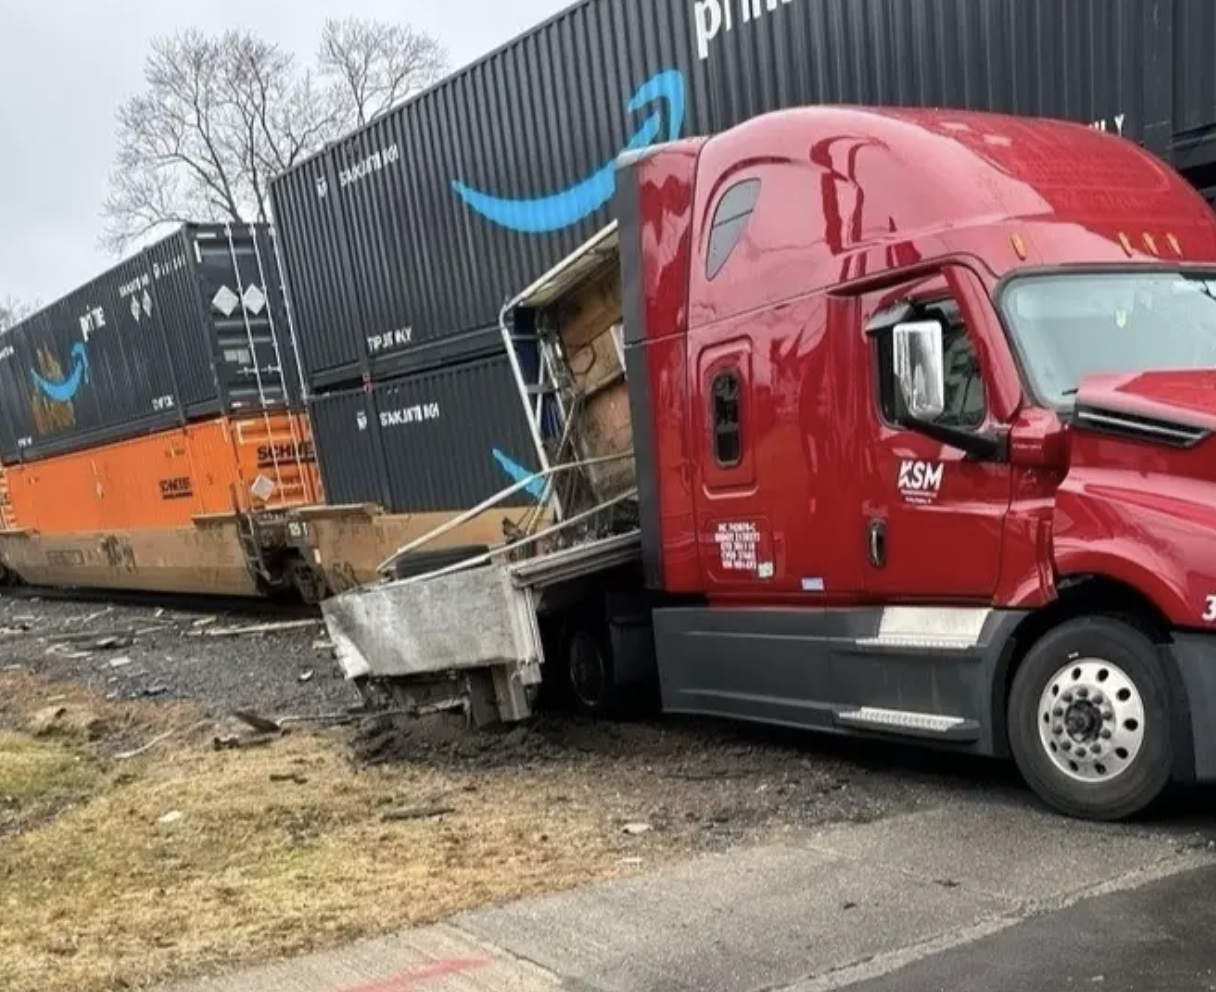 A damaged truck next to containers